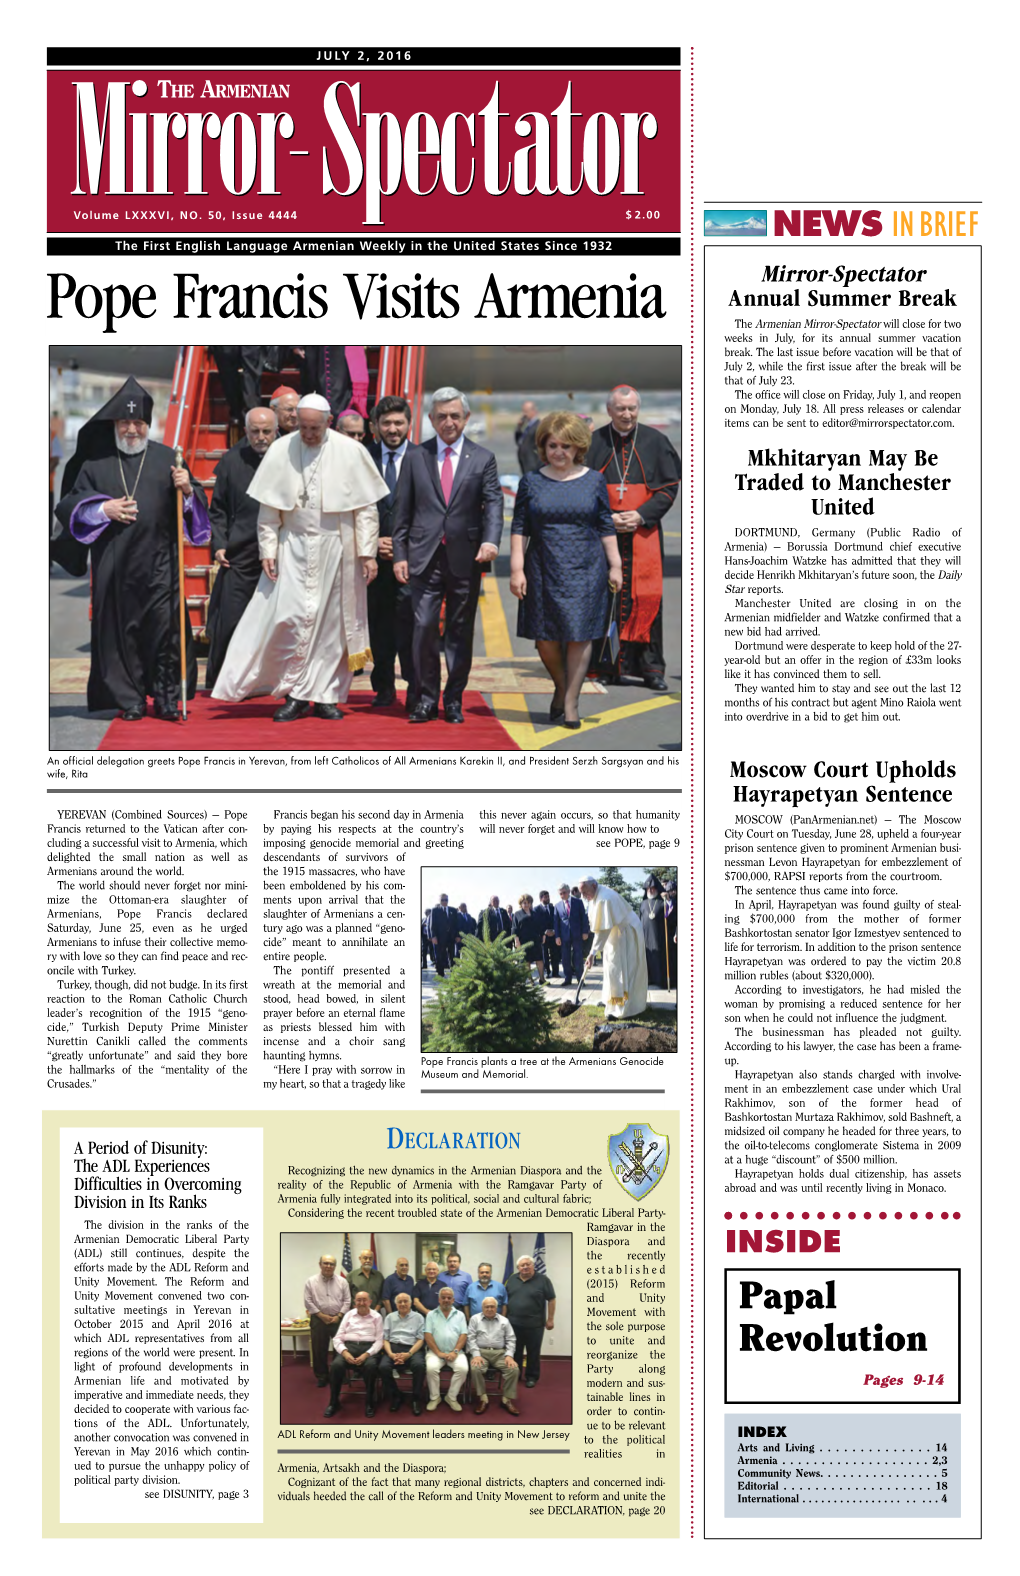 Pope Francis Visits Armenia Annual Summer Break the Armenian Mirror-Spectator Will Close for Two Weeks in July, for Its Annual Summer Vacation Break